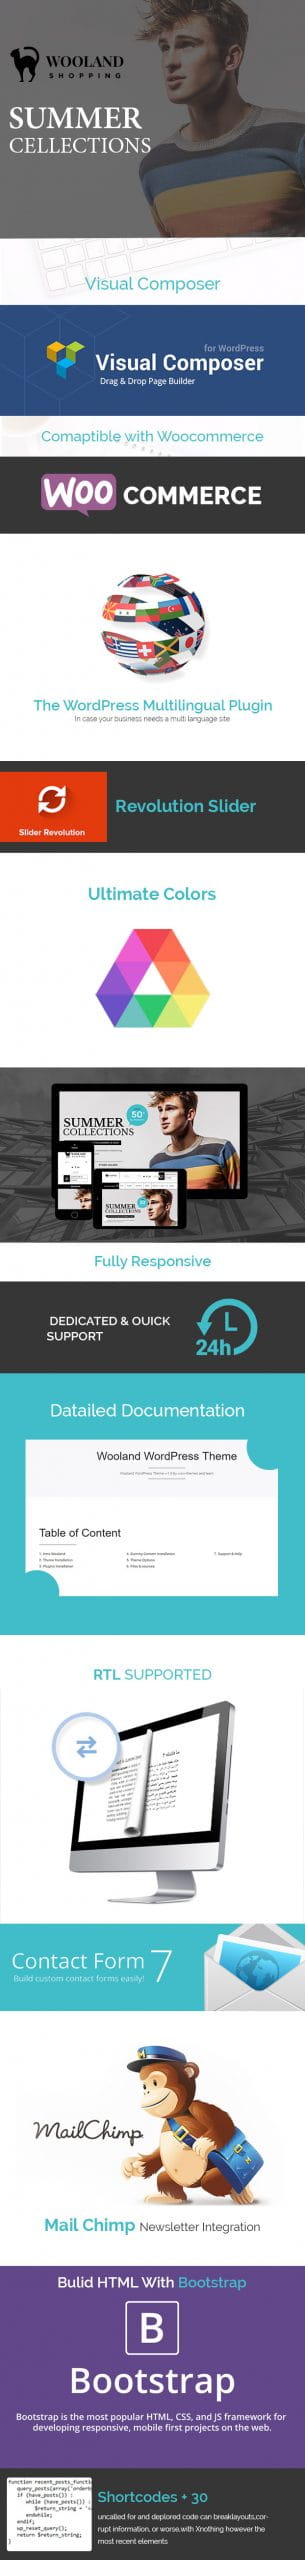 Wooland - Responsive eCommerce HTML Template